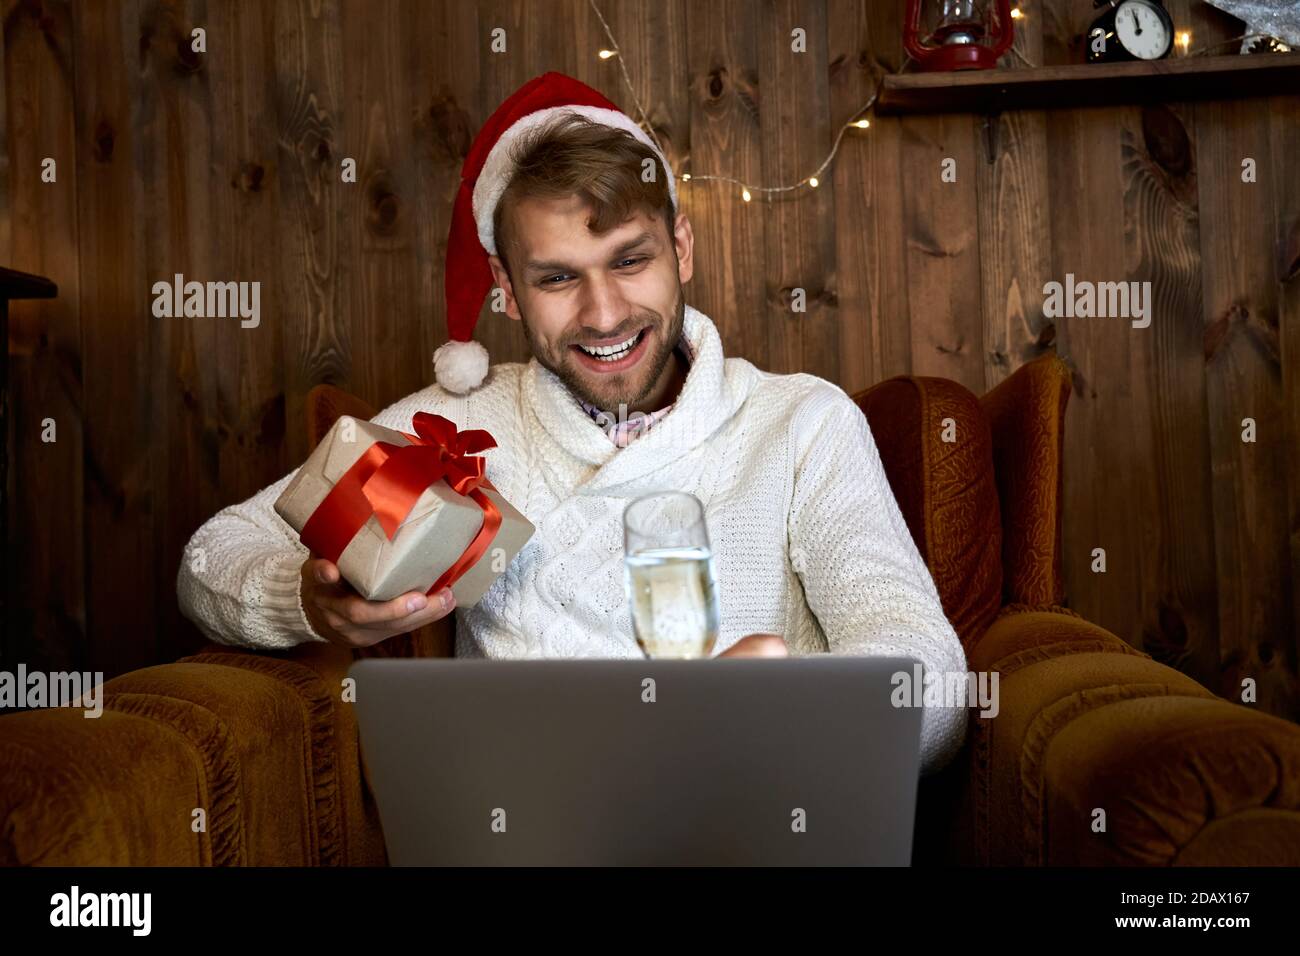 Happy young man celebrating virtual New Year virtual online party using laptop. Stock Photo